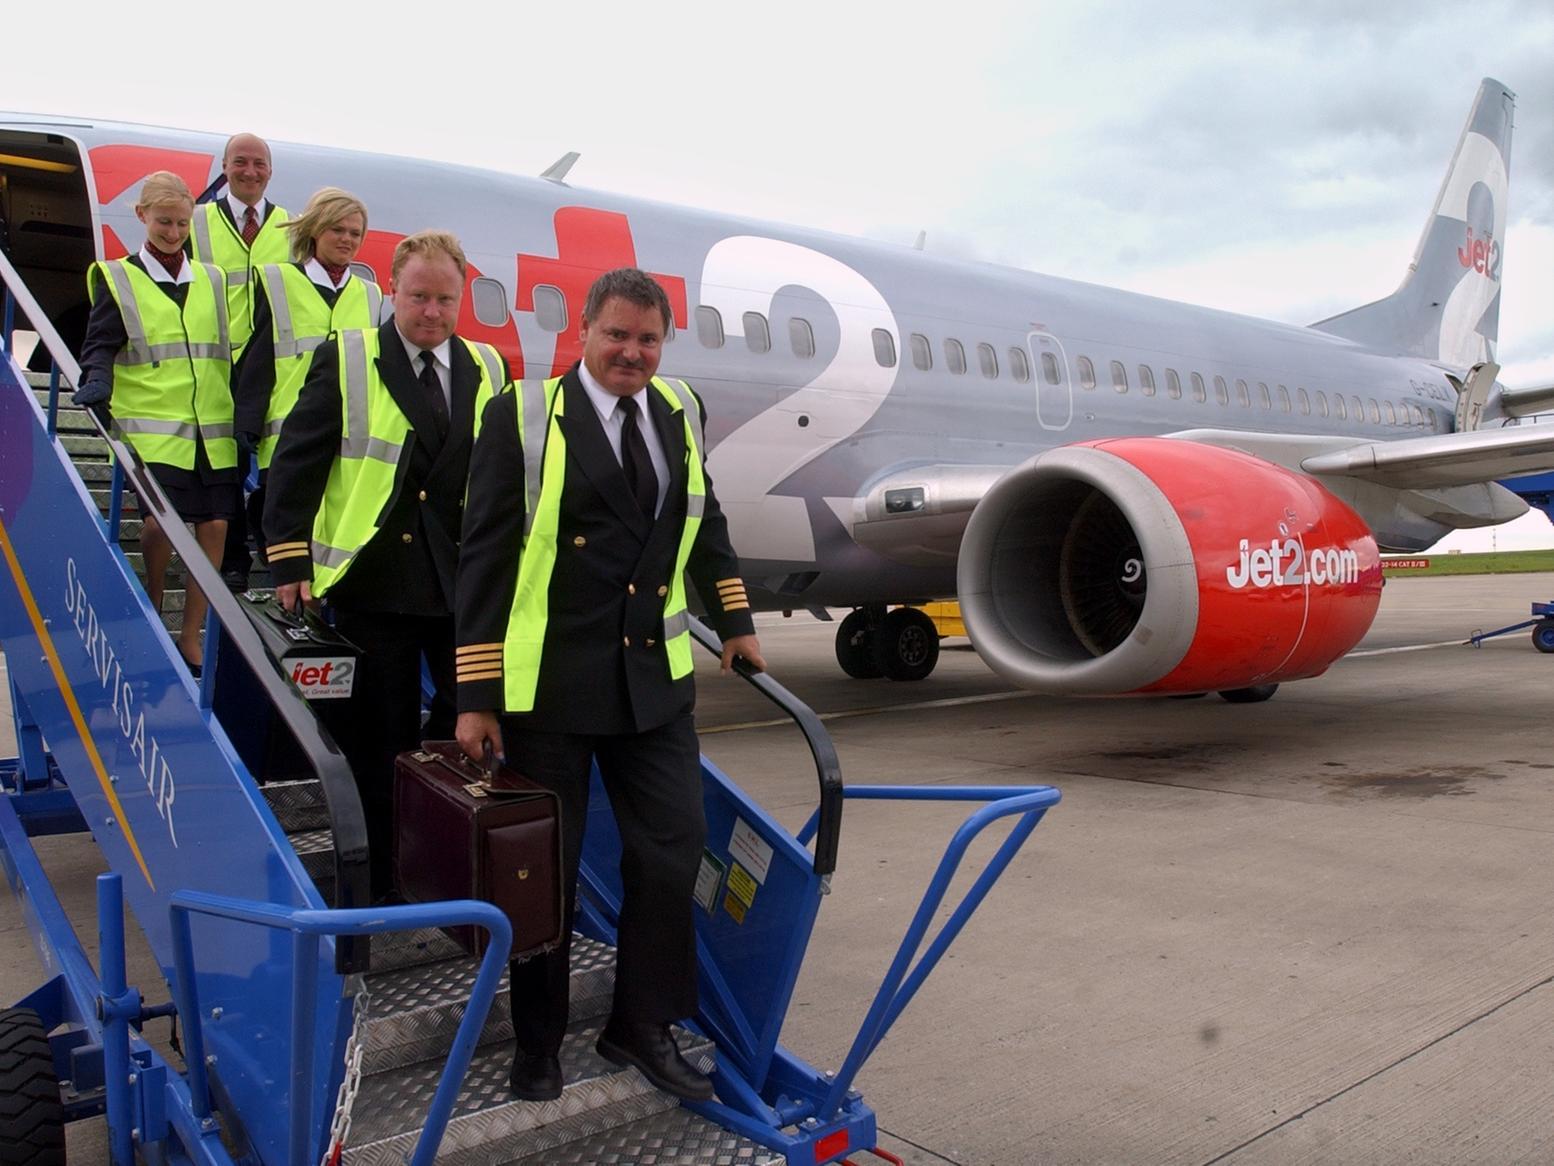 Jet2 cabin crew pictured leaving the aircraft.